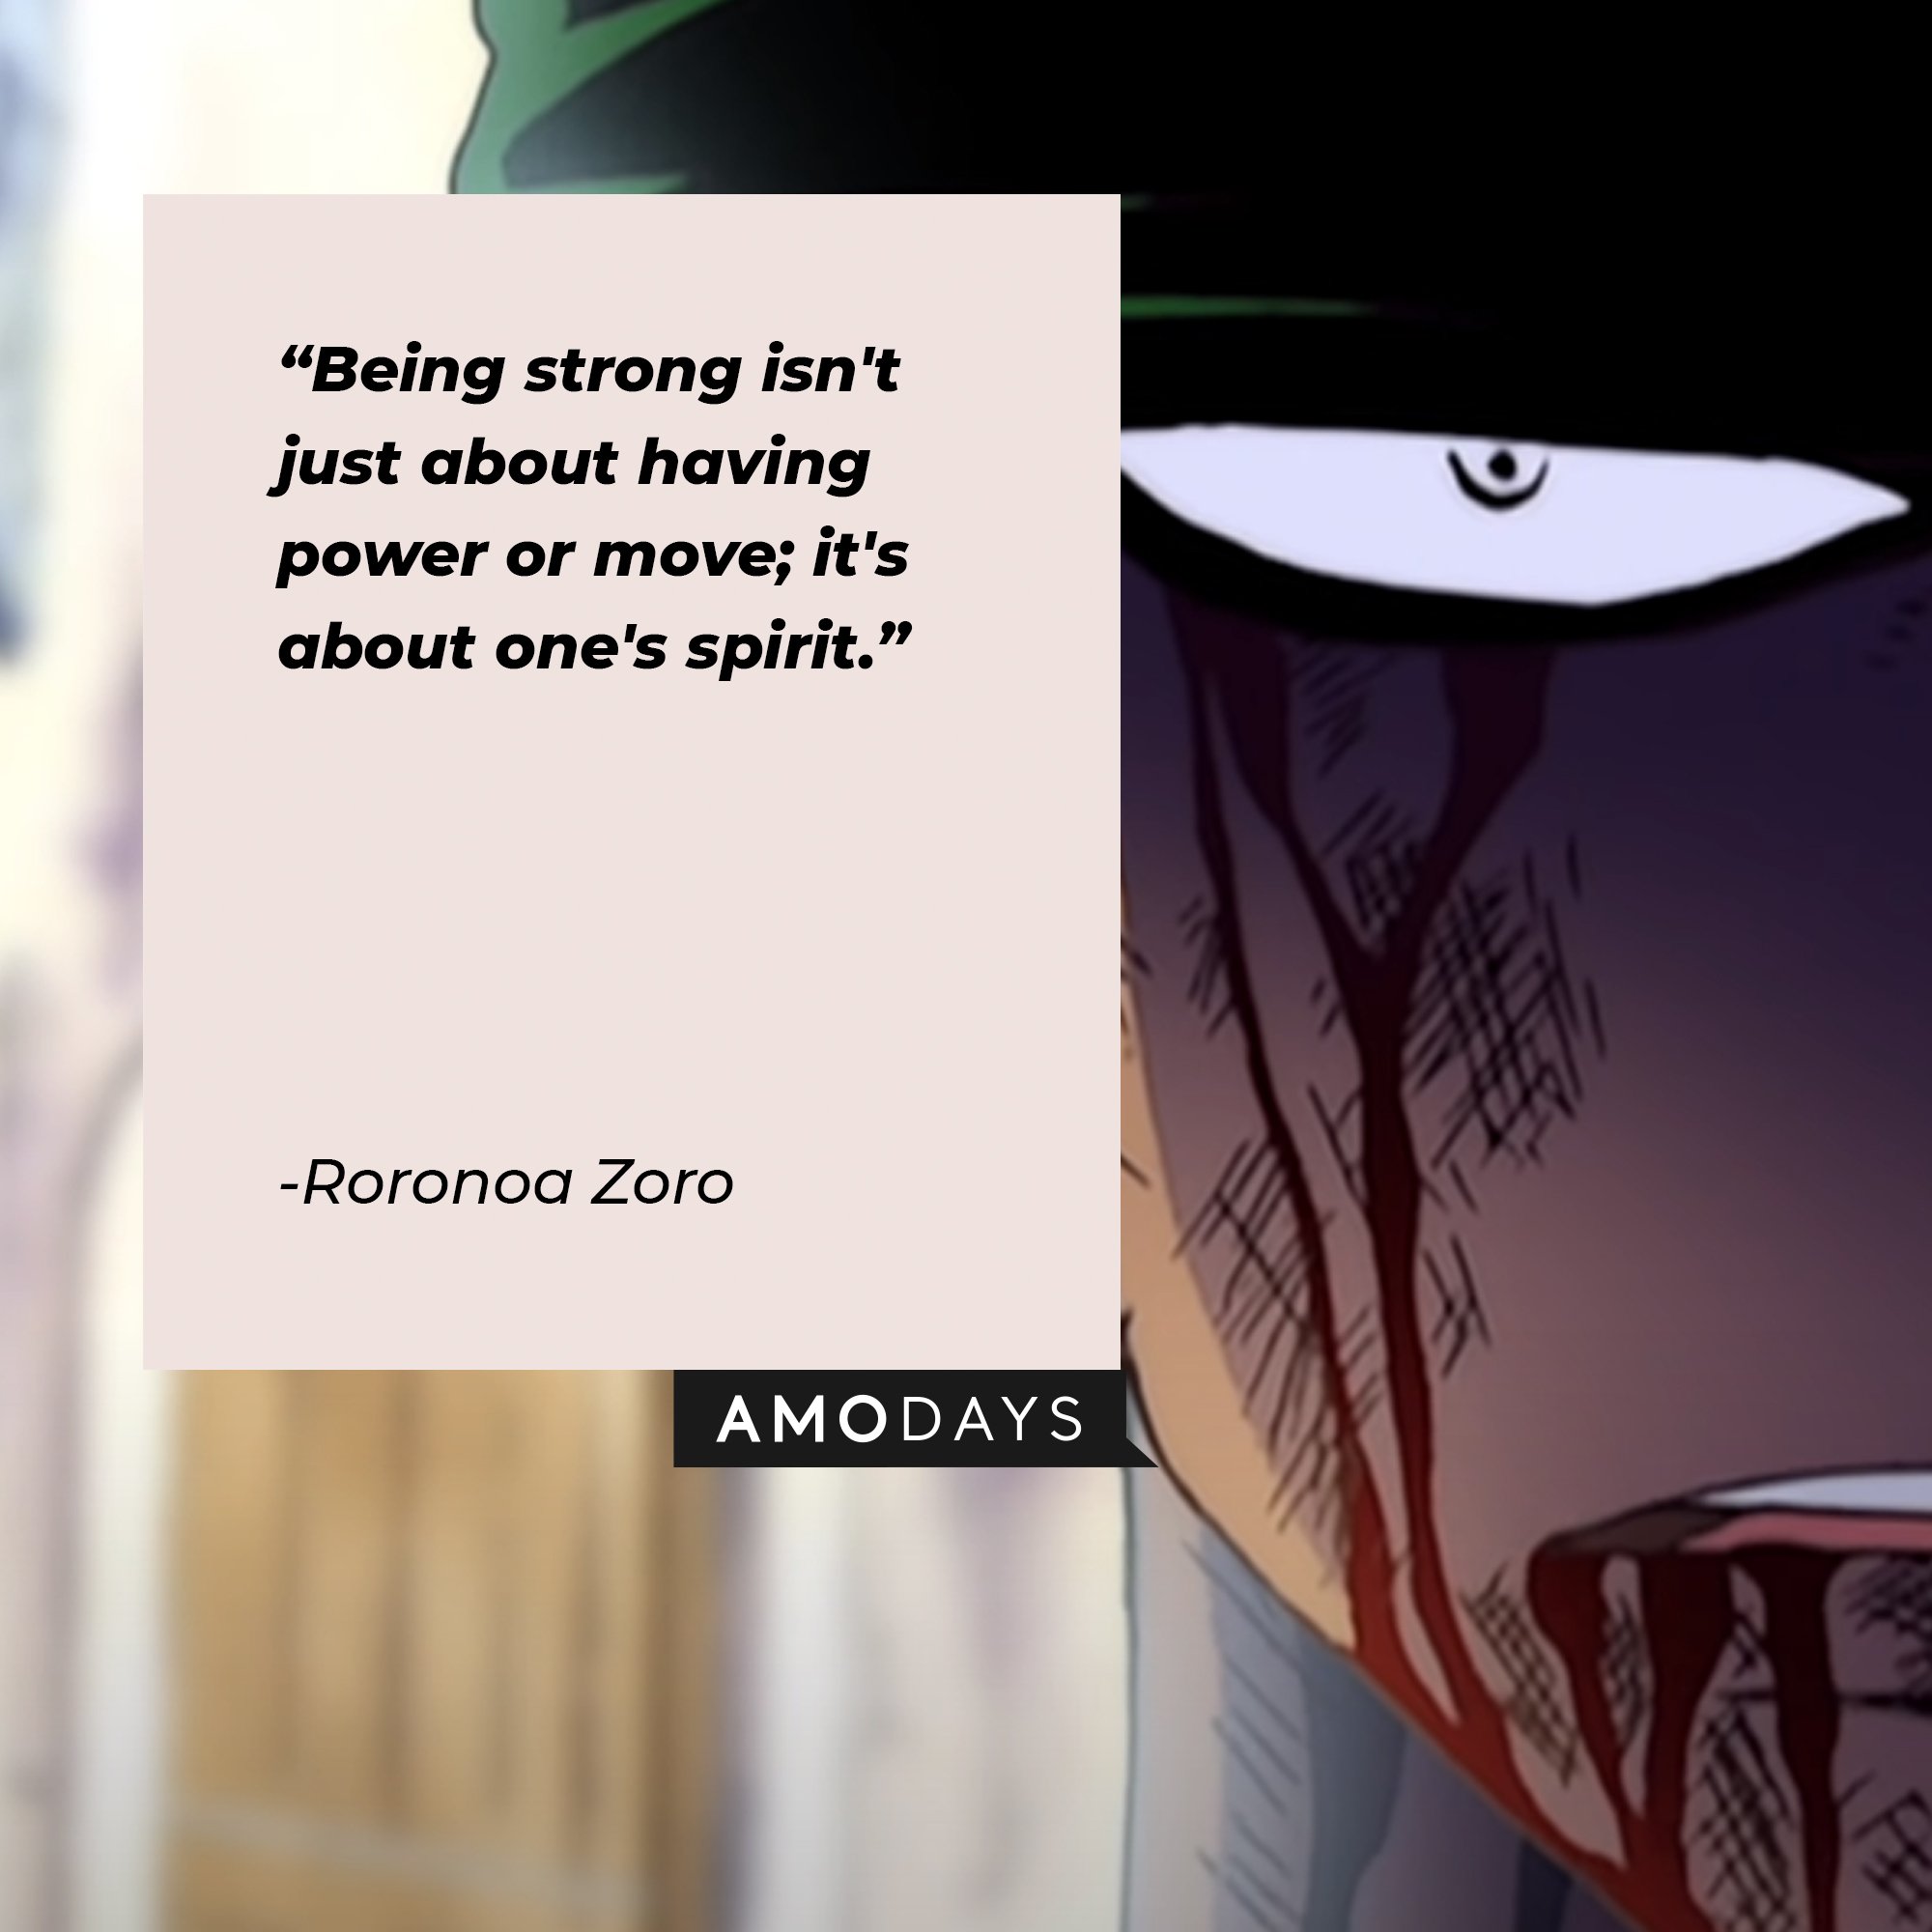 Roronoa Zoro’s quote: "Being strong isn't just about having power or move; it's about one's spirit." | Image: AmoDays